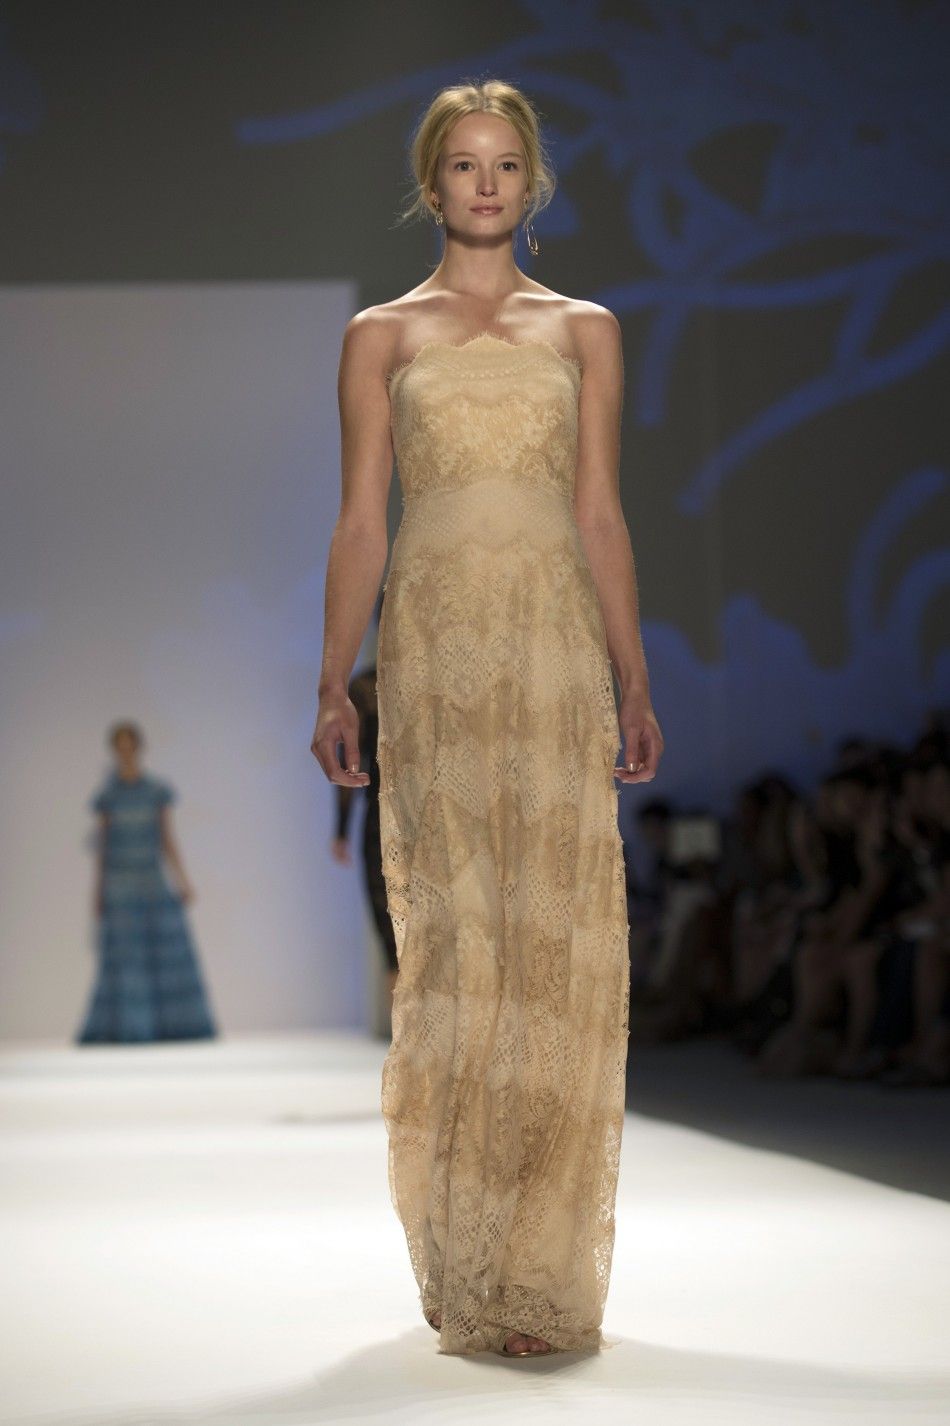 A model presents a creation from the Tadashi Shoji SpringSummer 2013 collection during New York Fashion Week September 6, 2012. 